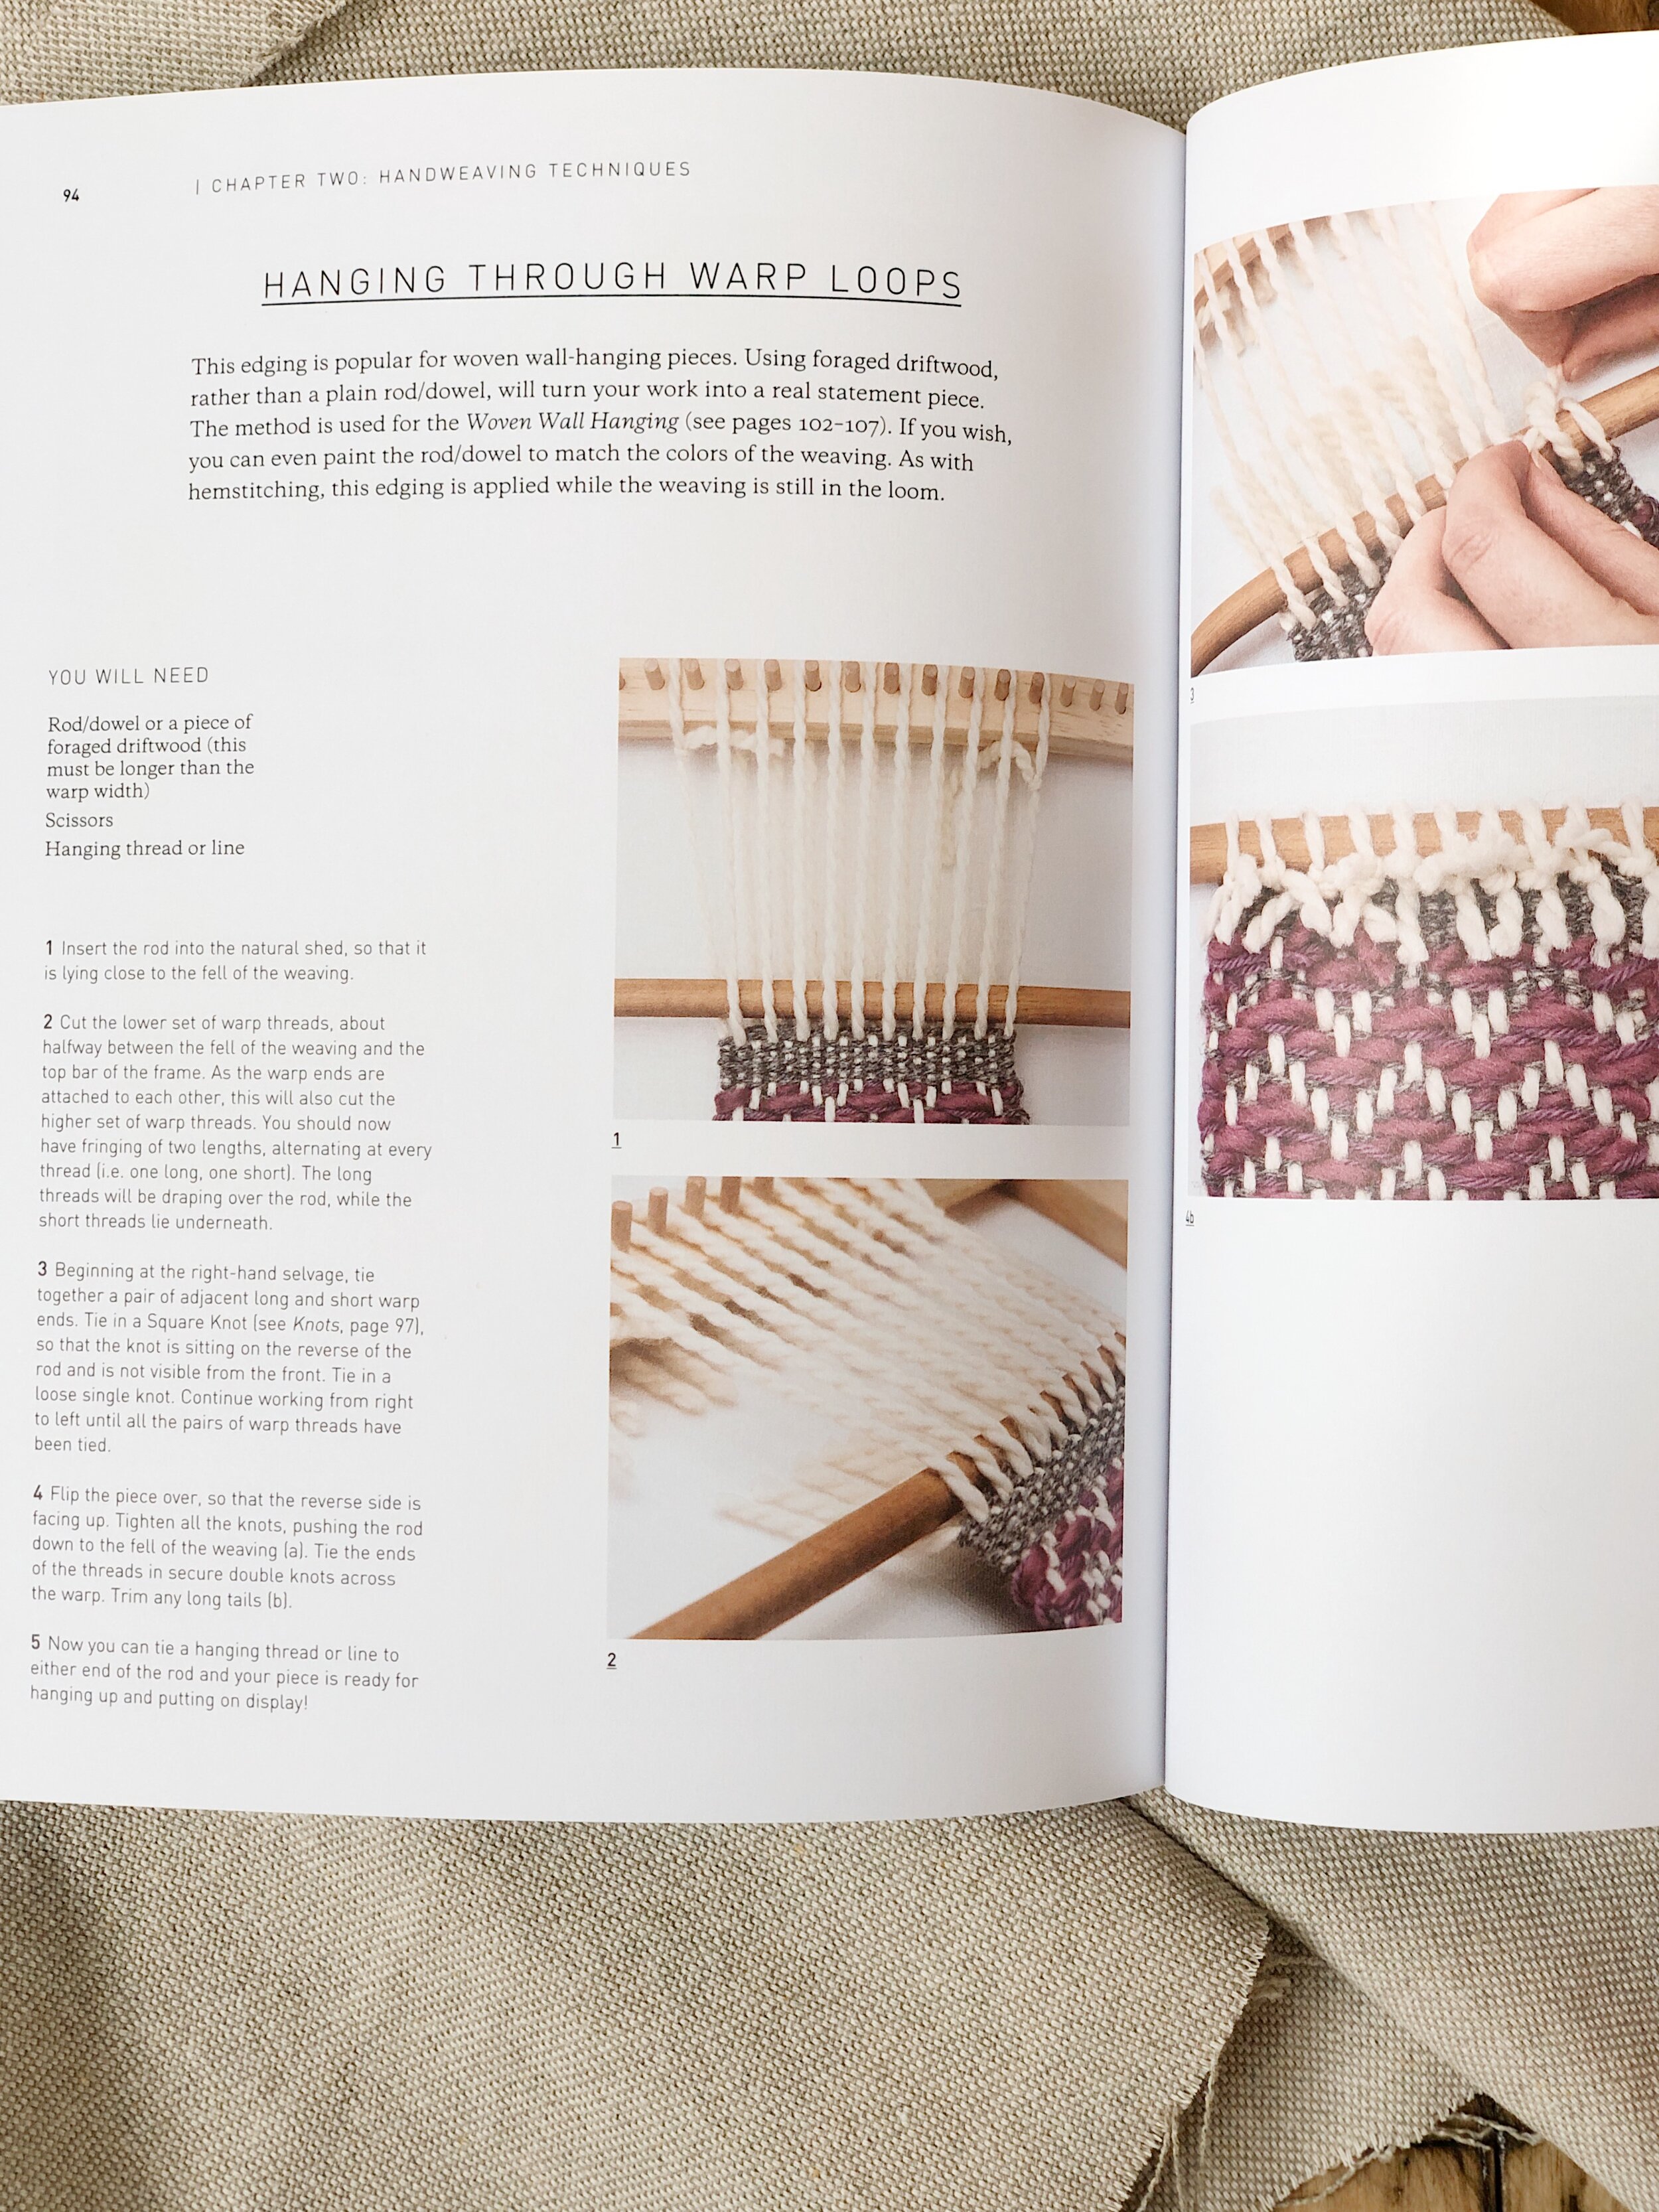 Weaving Big on a Little Loom: Create Inspired Larger Pieces [Book]